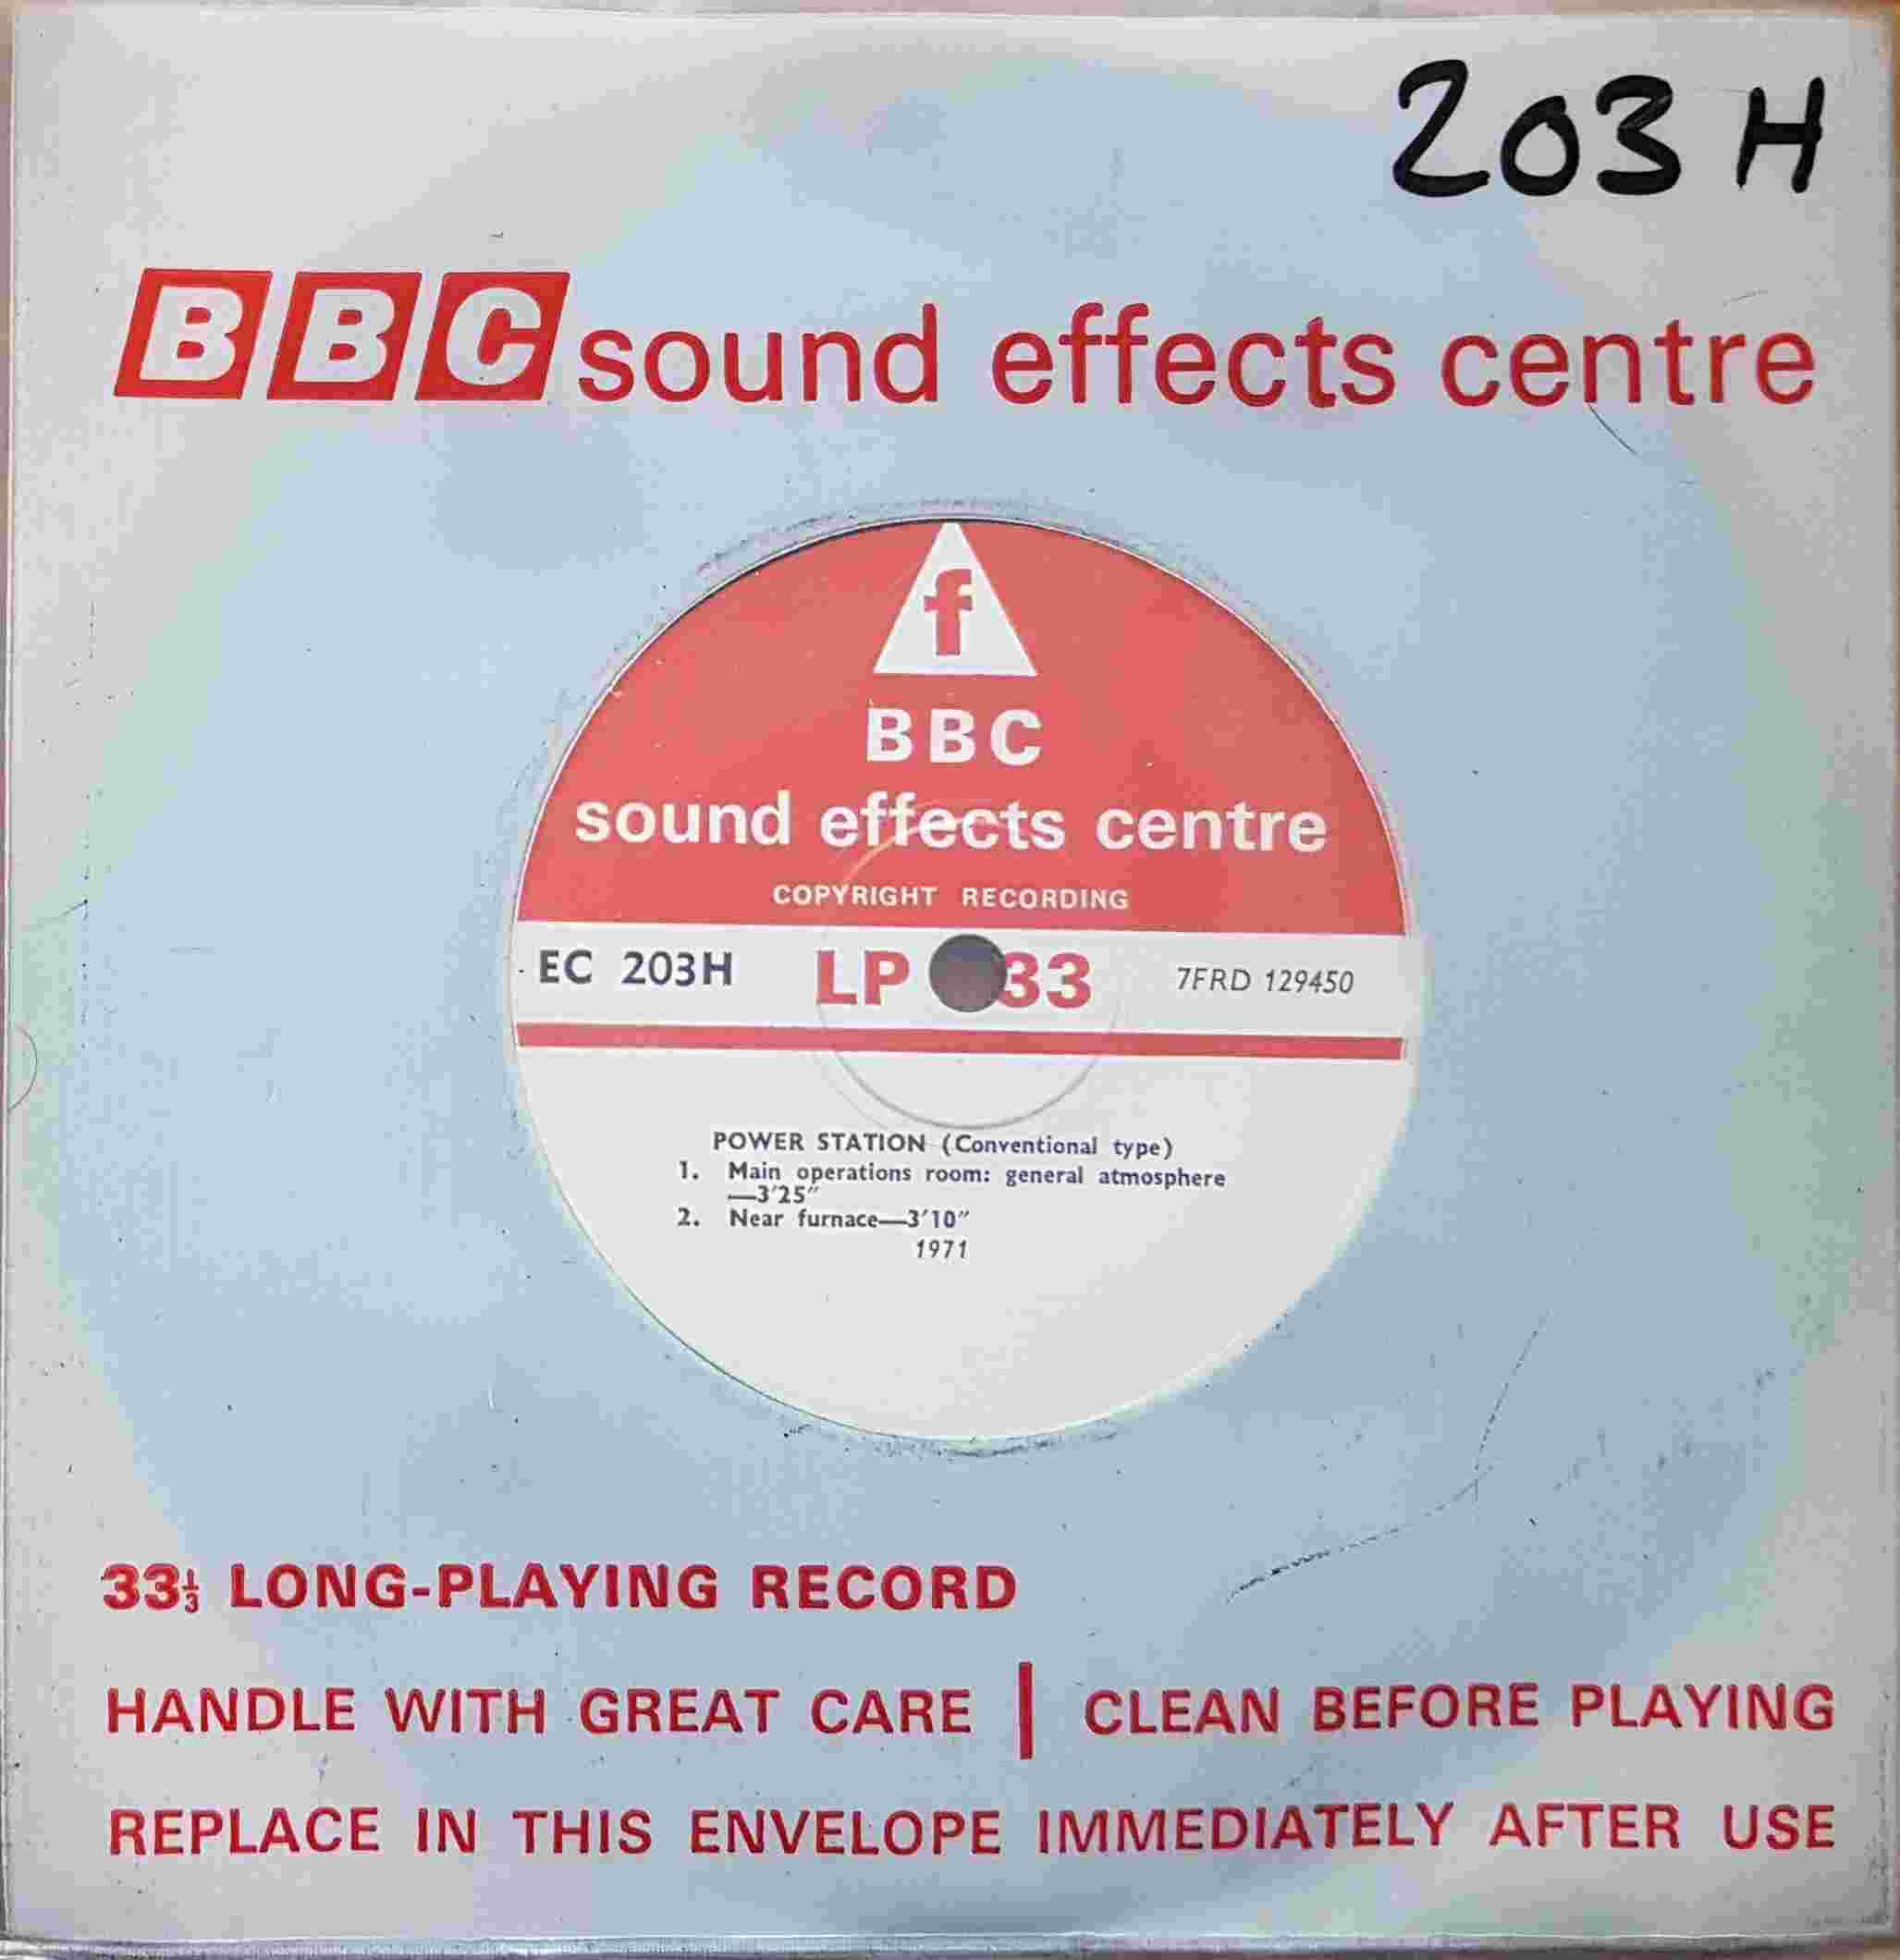 Picture of EC 203H Power station (Conventional type) by artist Not registered from the BBC records and Tapes library